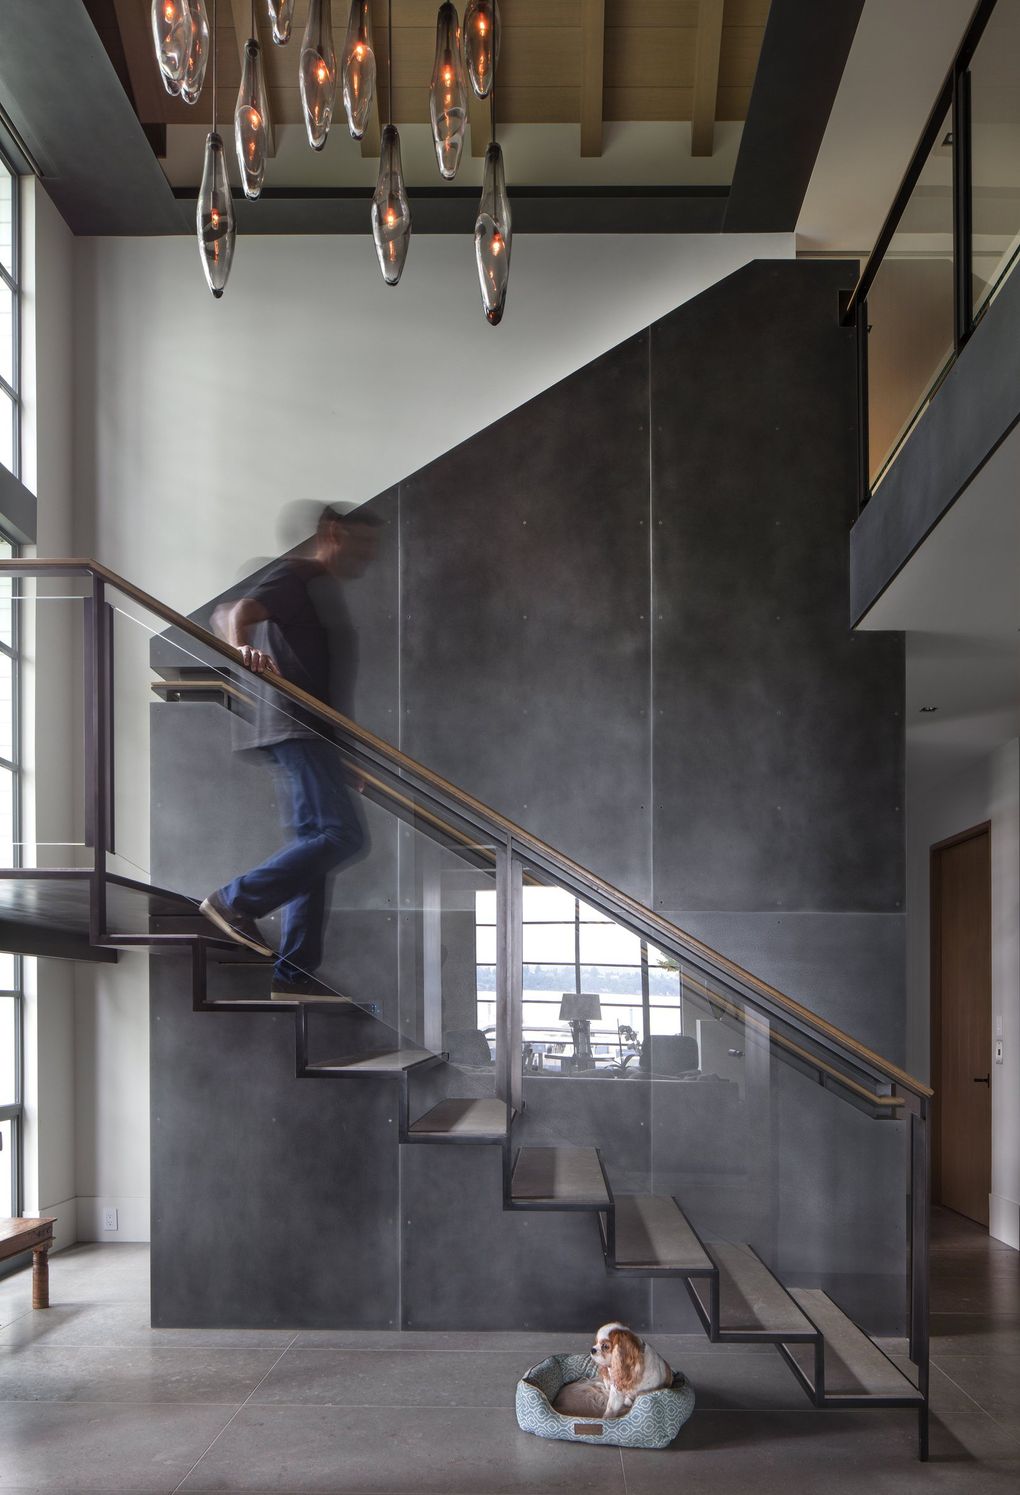 The dramatic floating staircase of this Washington Park home  rises in the grand entry hall, with French limestone floors and a textured steel wall crafted by Decorative Metal Arts. “The challenge to design the stairs was to keep them as open as possible through the window,” says project manager Michael McFadden of Stuart Silk Architects. (Steve Ringman / The Seattle Times, 2017)